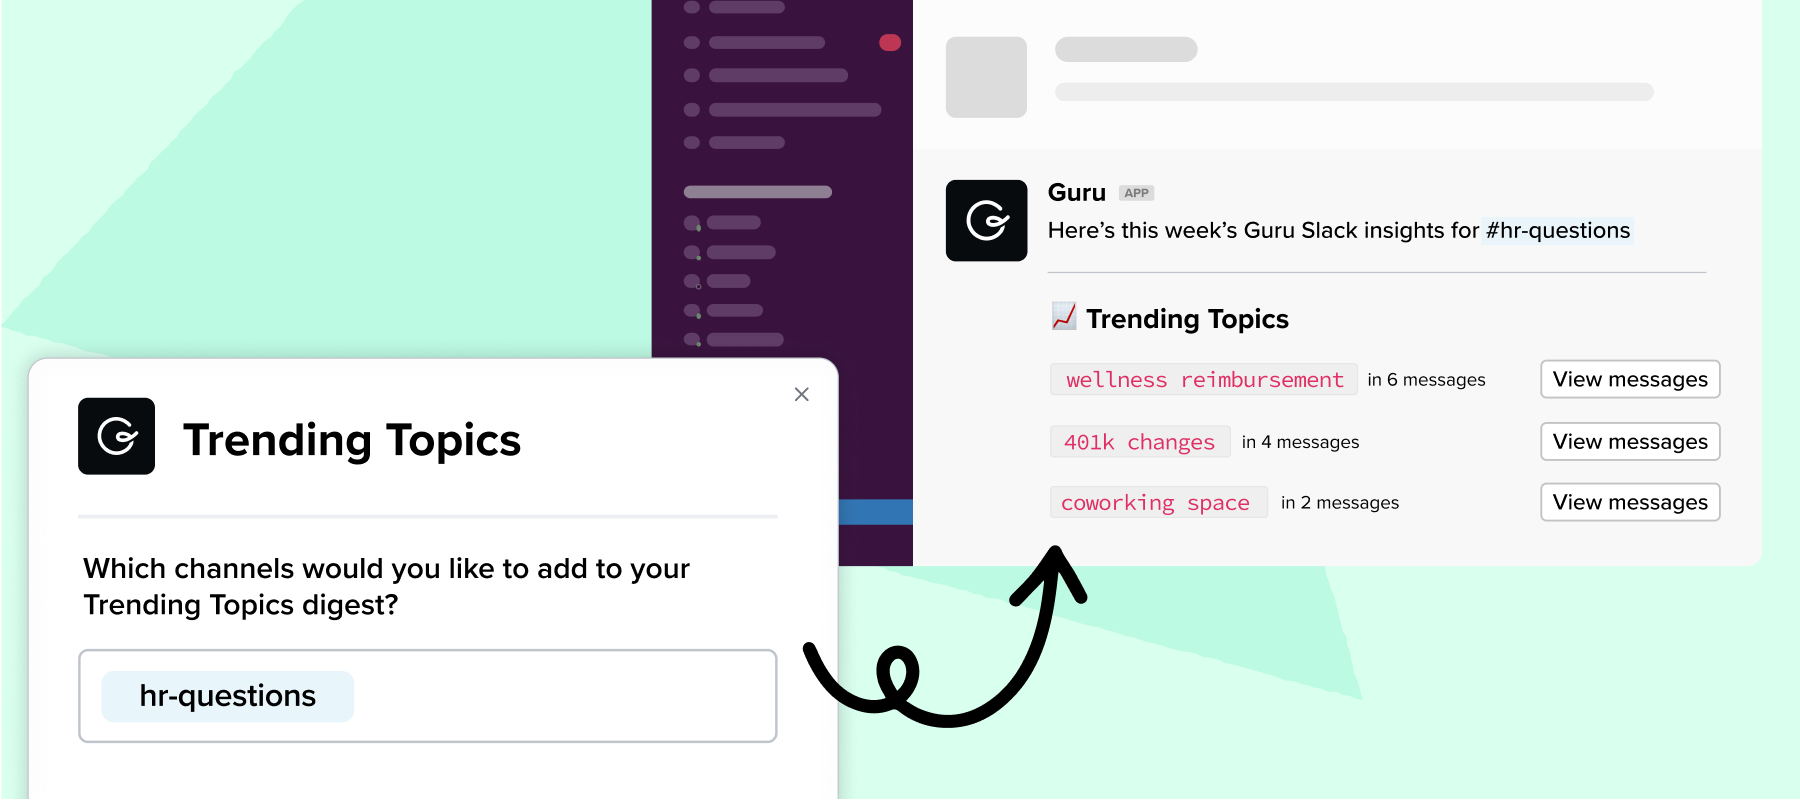 Let Guru's AI within Slack tell you what knowledge gaps you have